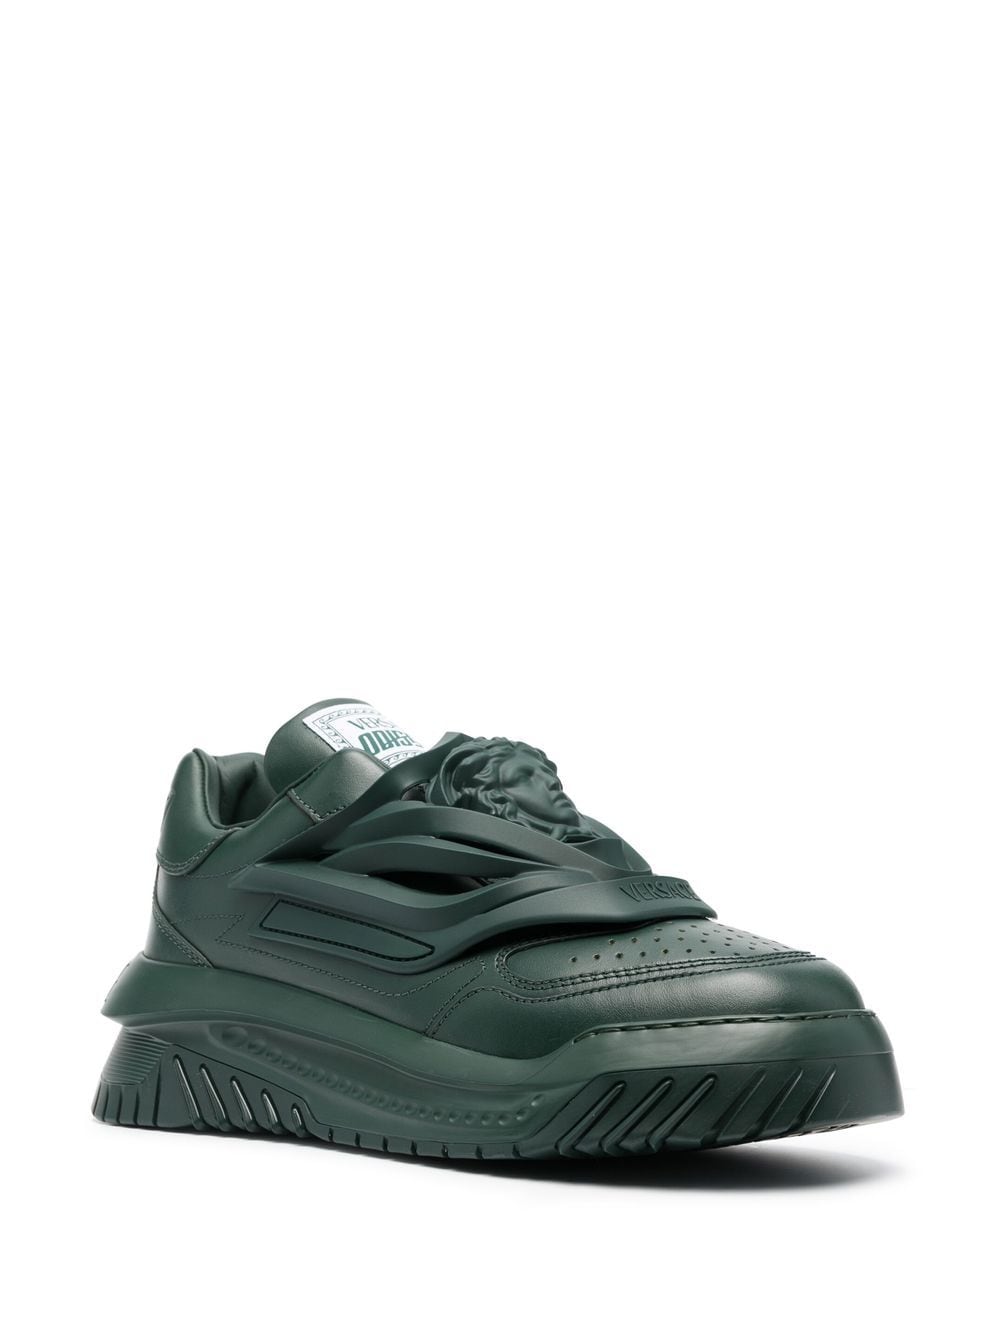 Versace Odissea Chunky Leather Sneakers - Farfetch